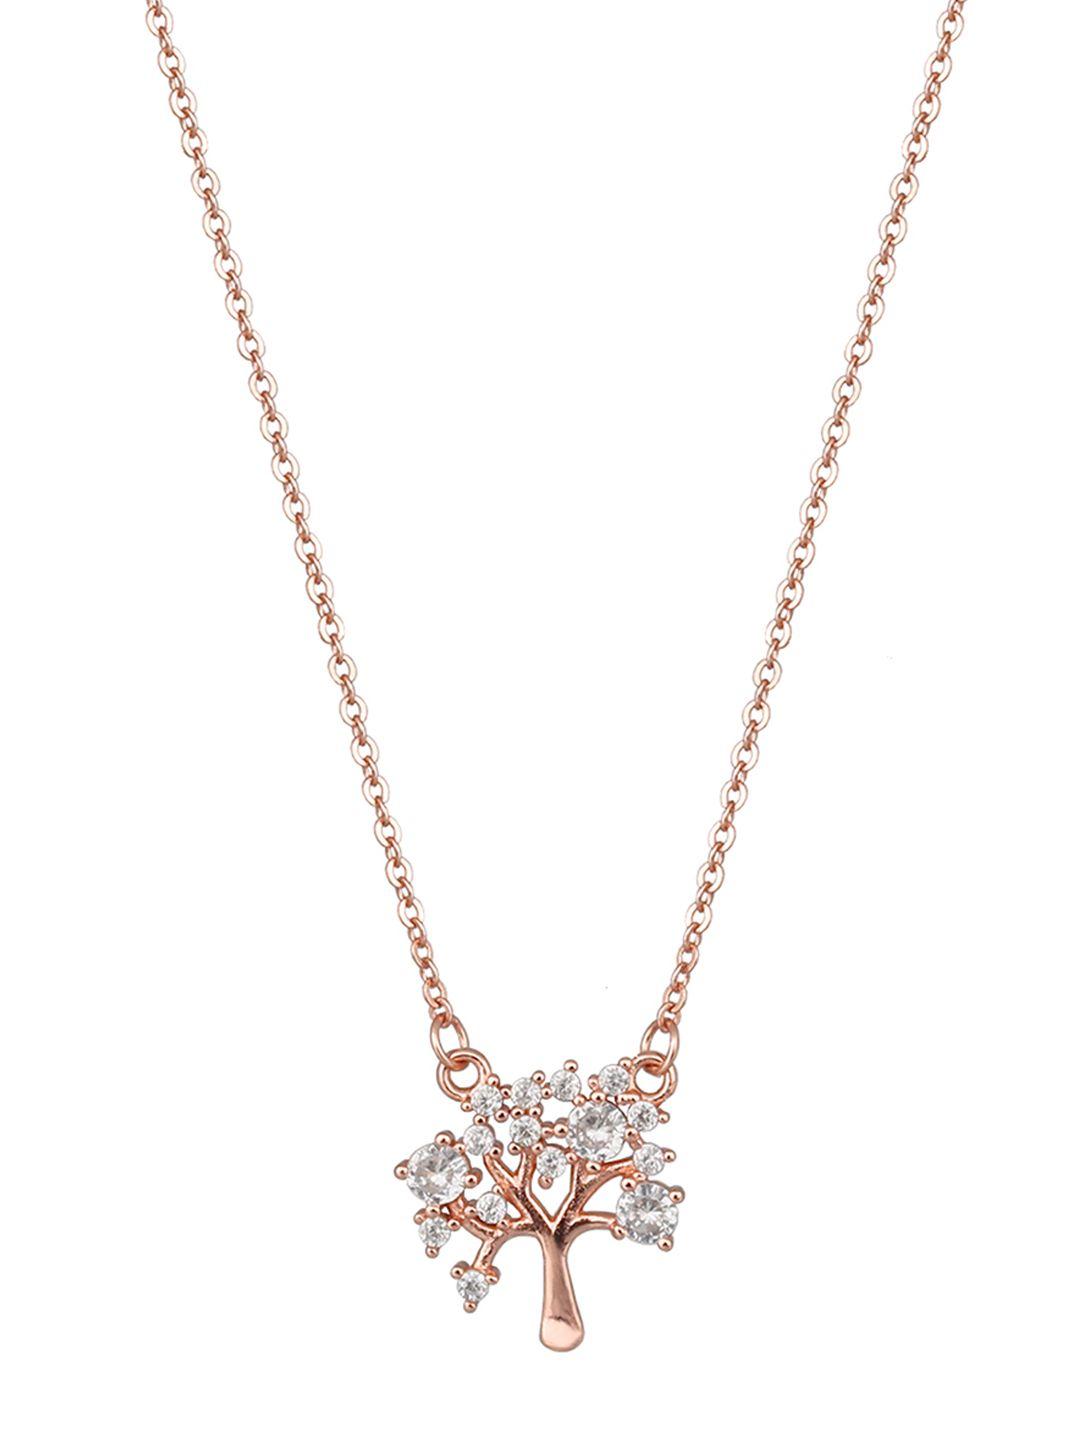 giva 925 sterling silver rose gold plated tree of life necklace